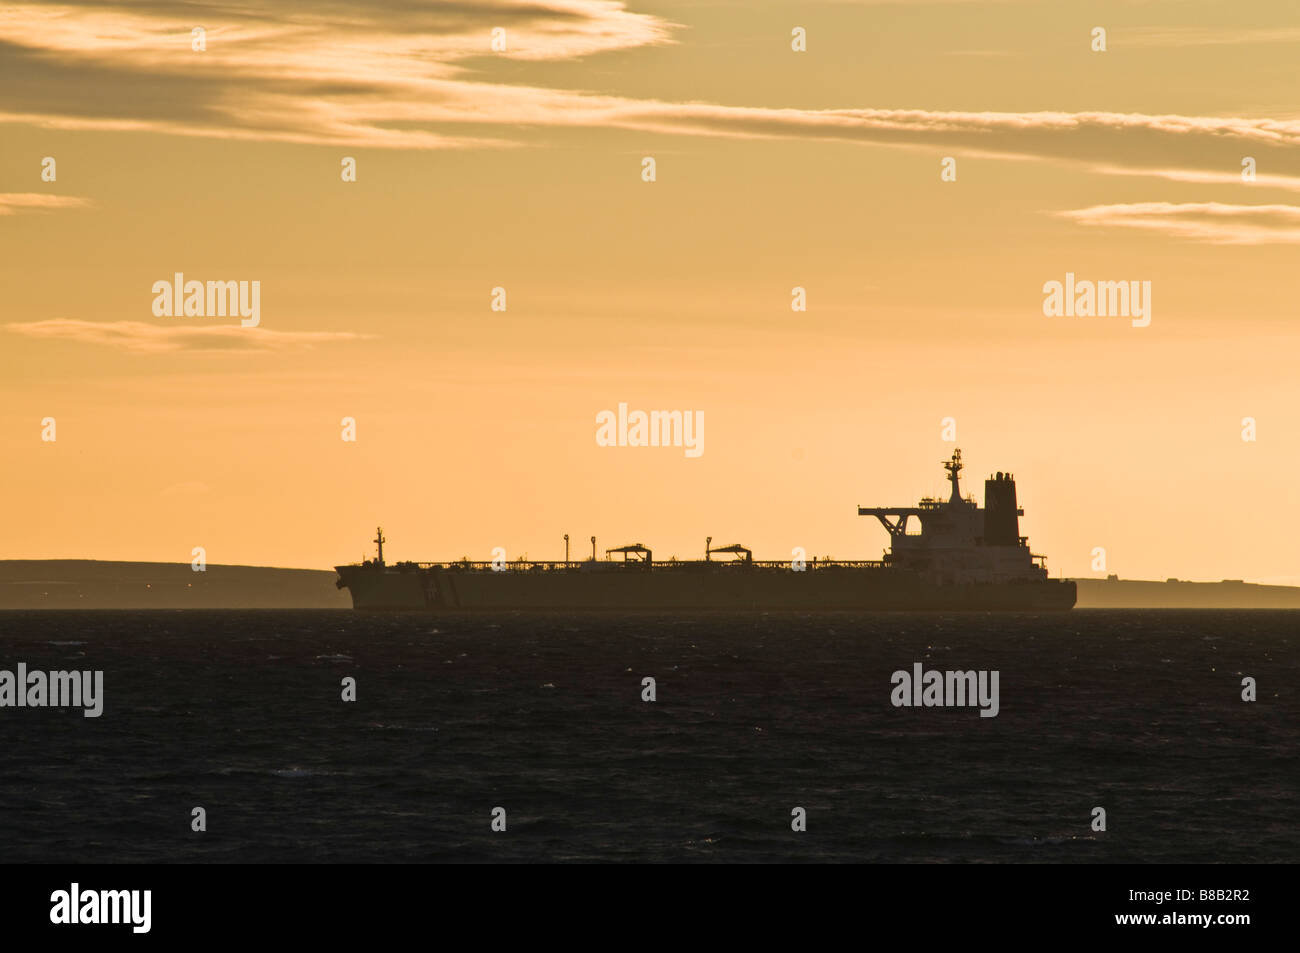 dh Oil tanker supertanker SCAPA FLOW ORKNEY Anchored sunset scotland tankers ship silhouette sea Stock Photo